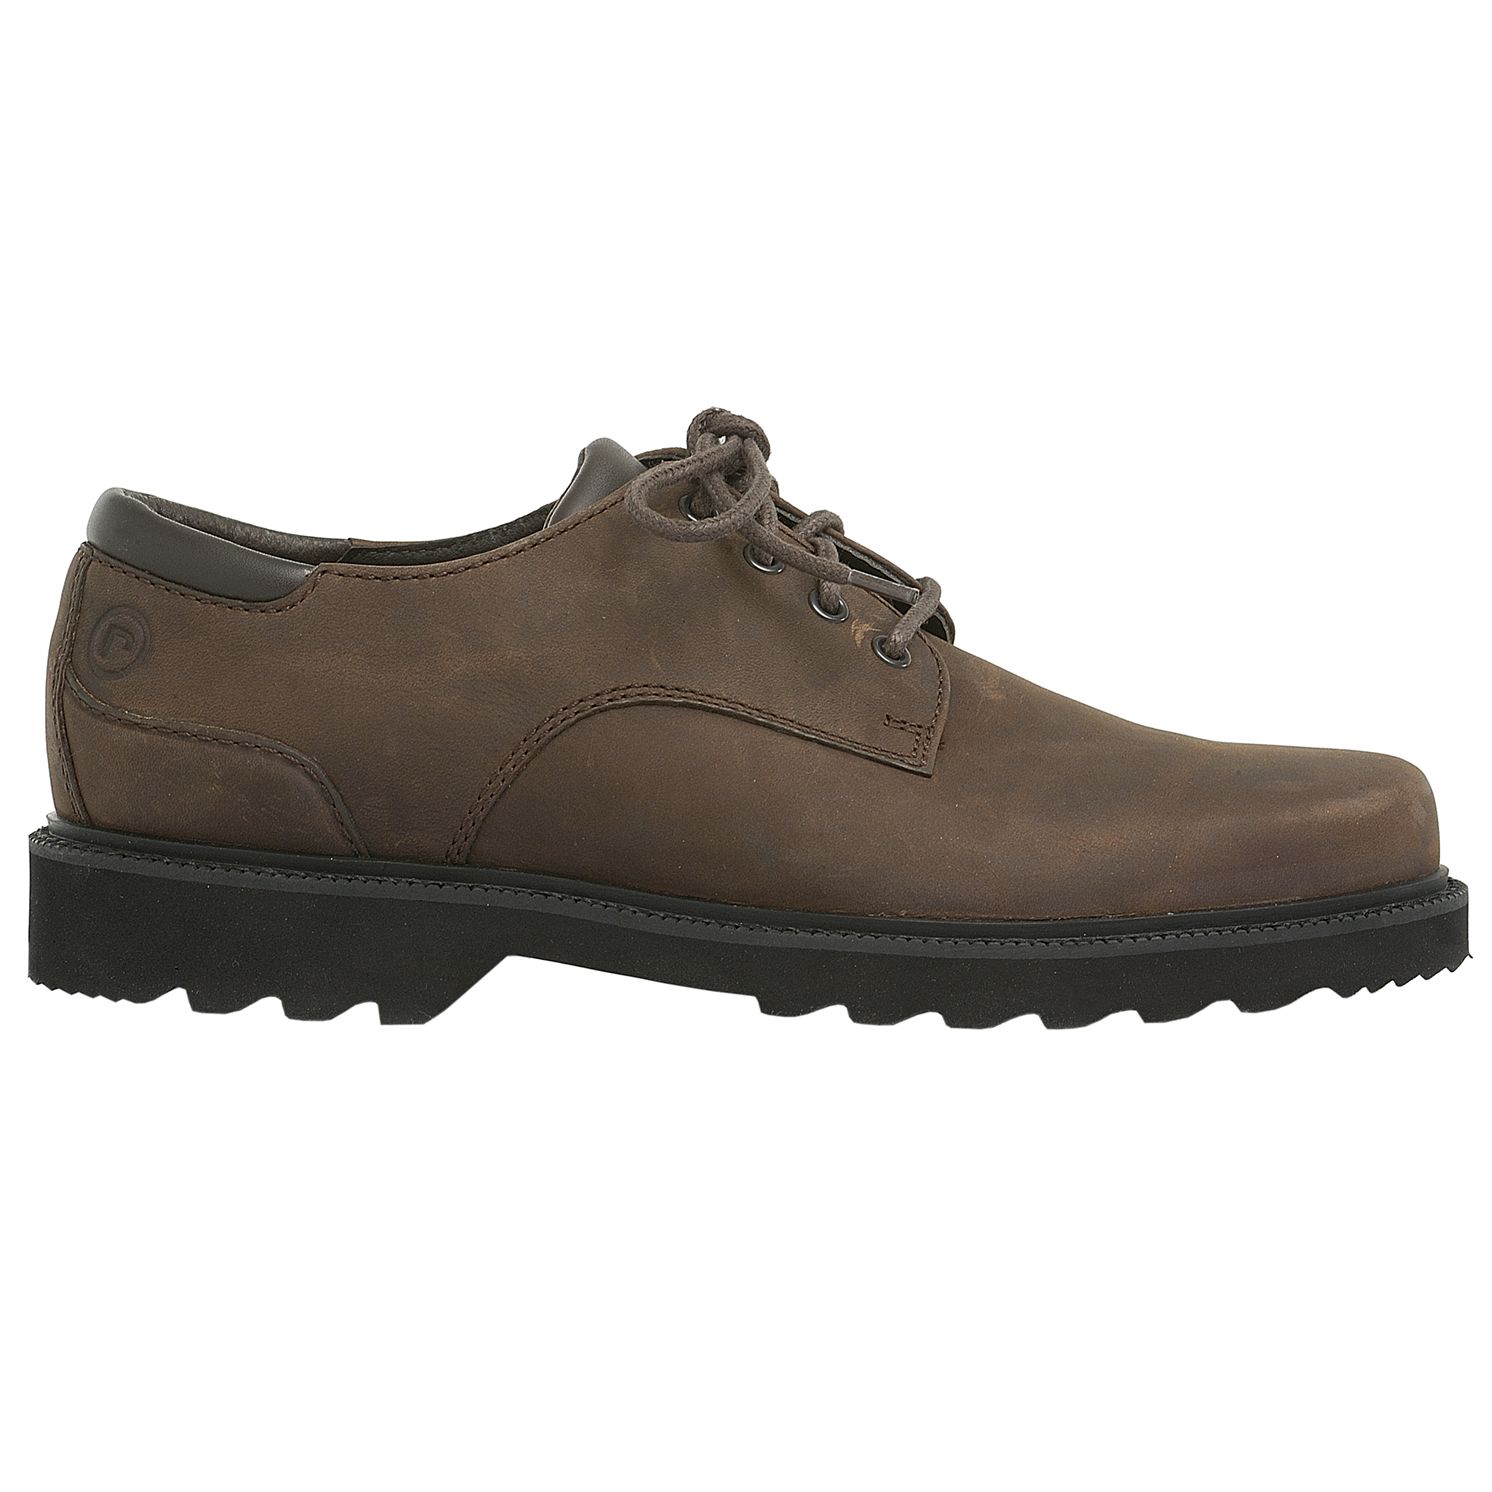 Rockport Northfield Shoes, Mocha, Size 10 - review, compare prices, buy ...